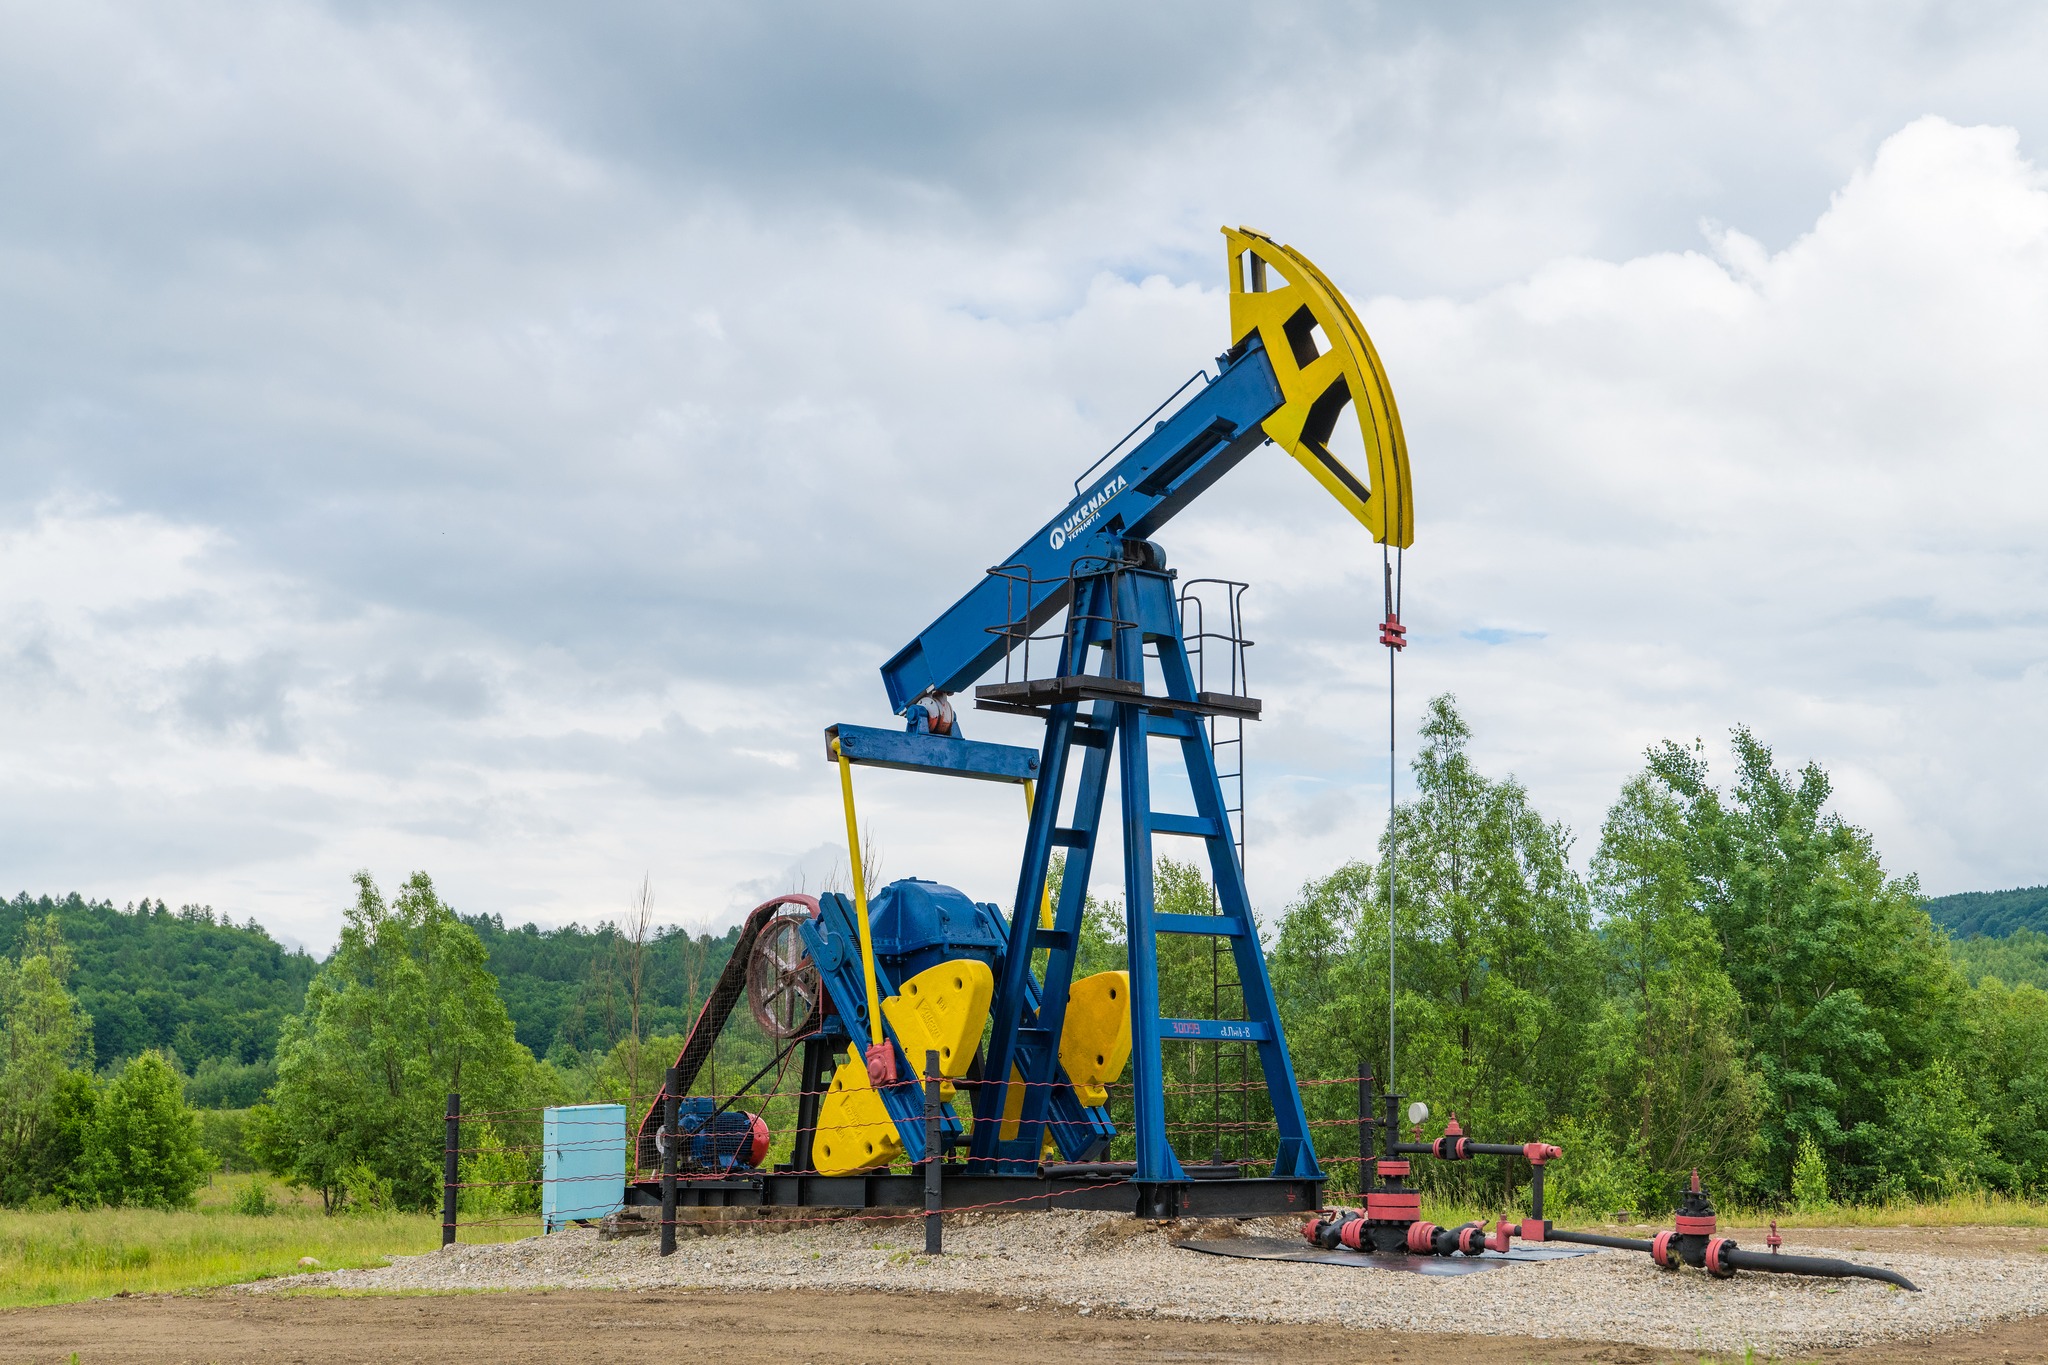 Ukrnafta increased reserves by 3 million tons of oil and 0.6 billion cubic meters of gas